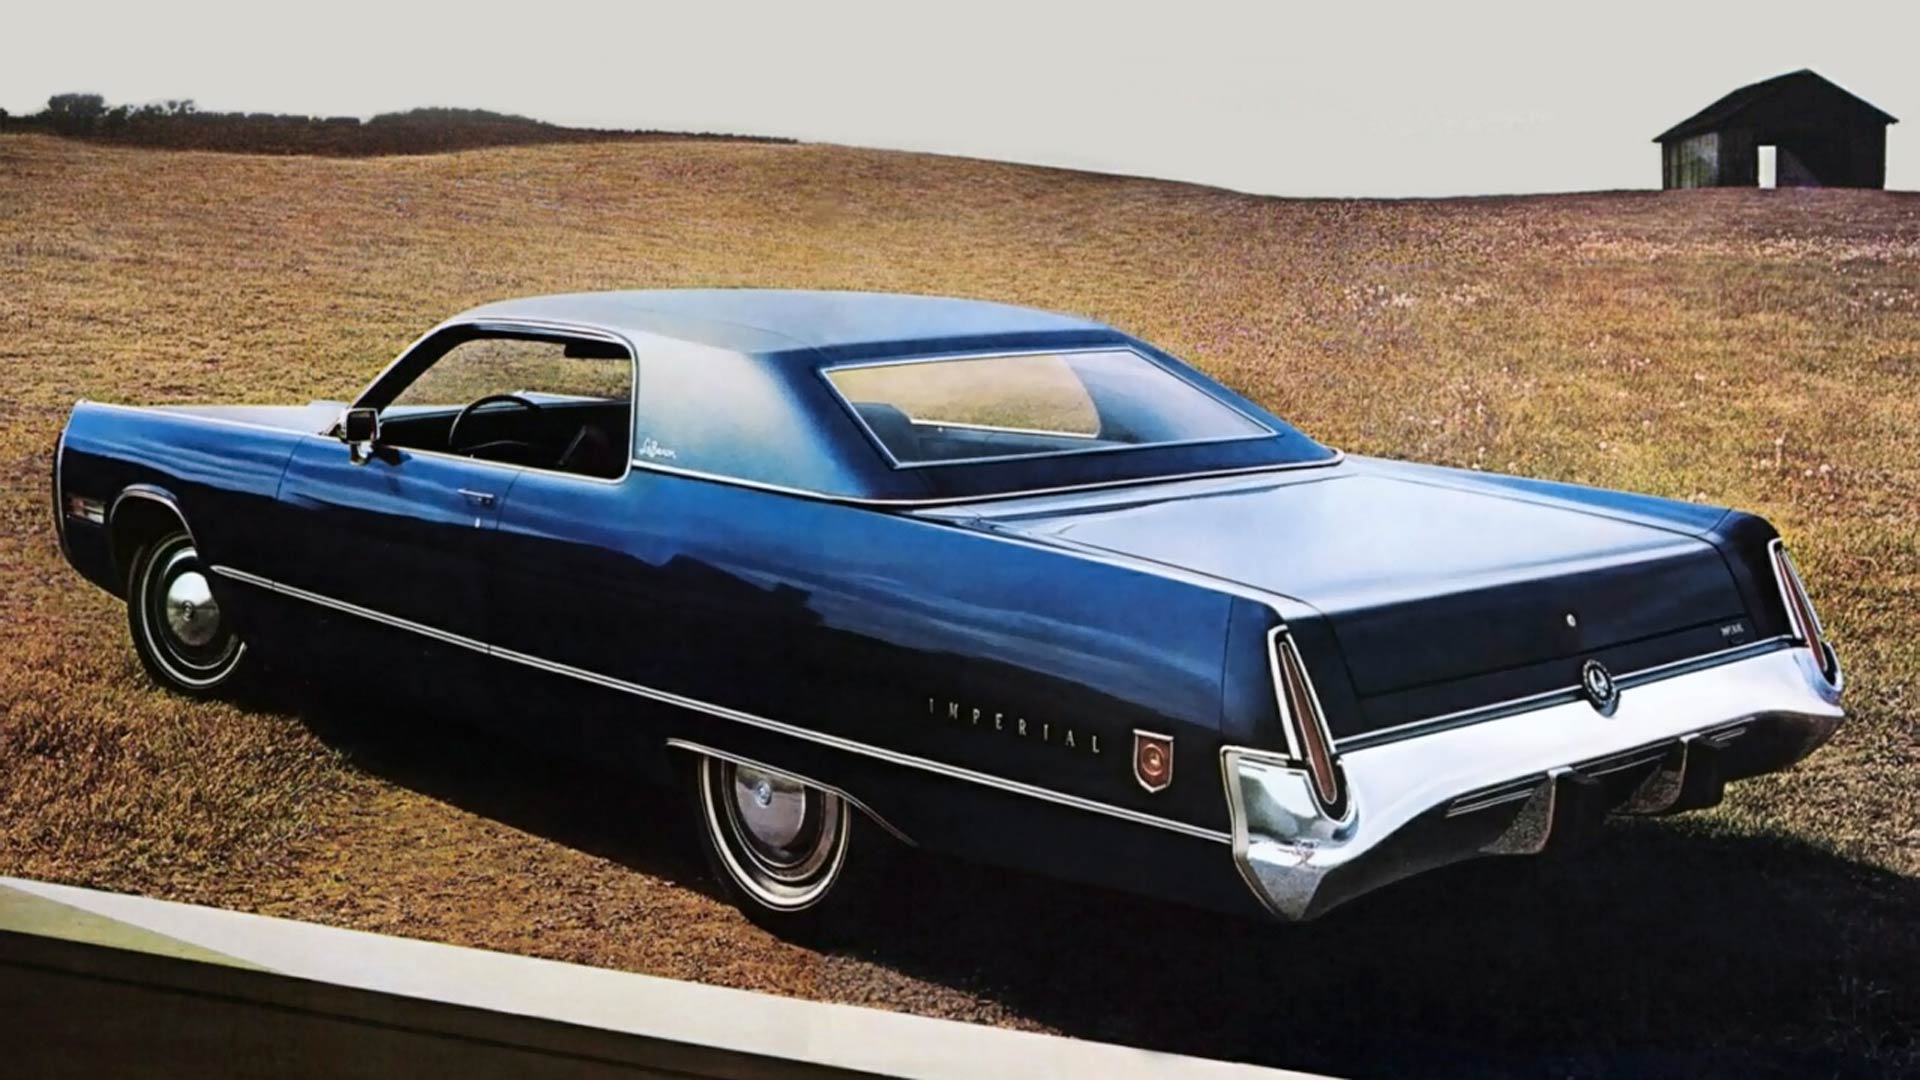 1973 Imperial LeBaron – 235.3 inches